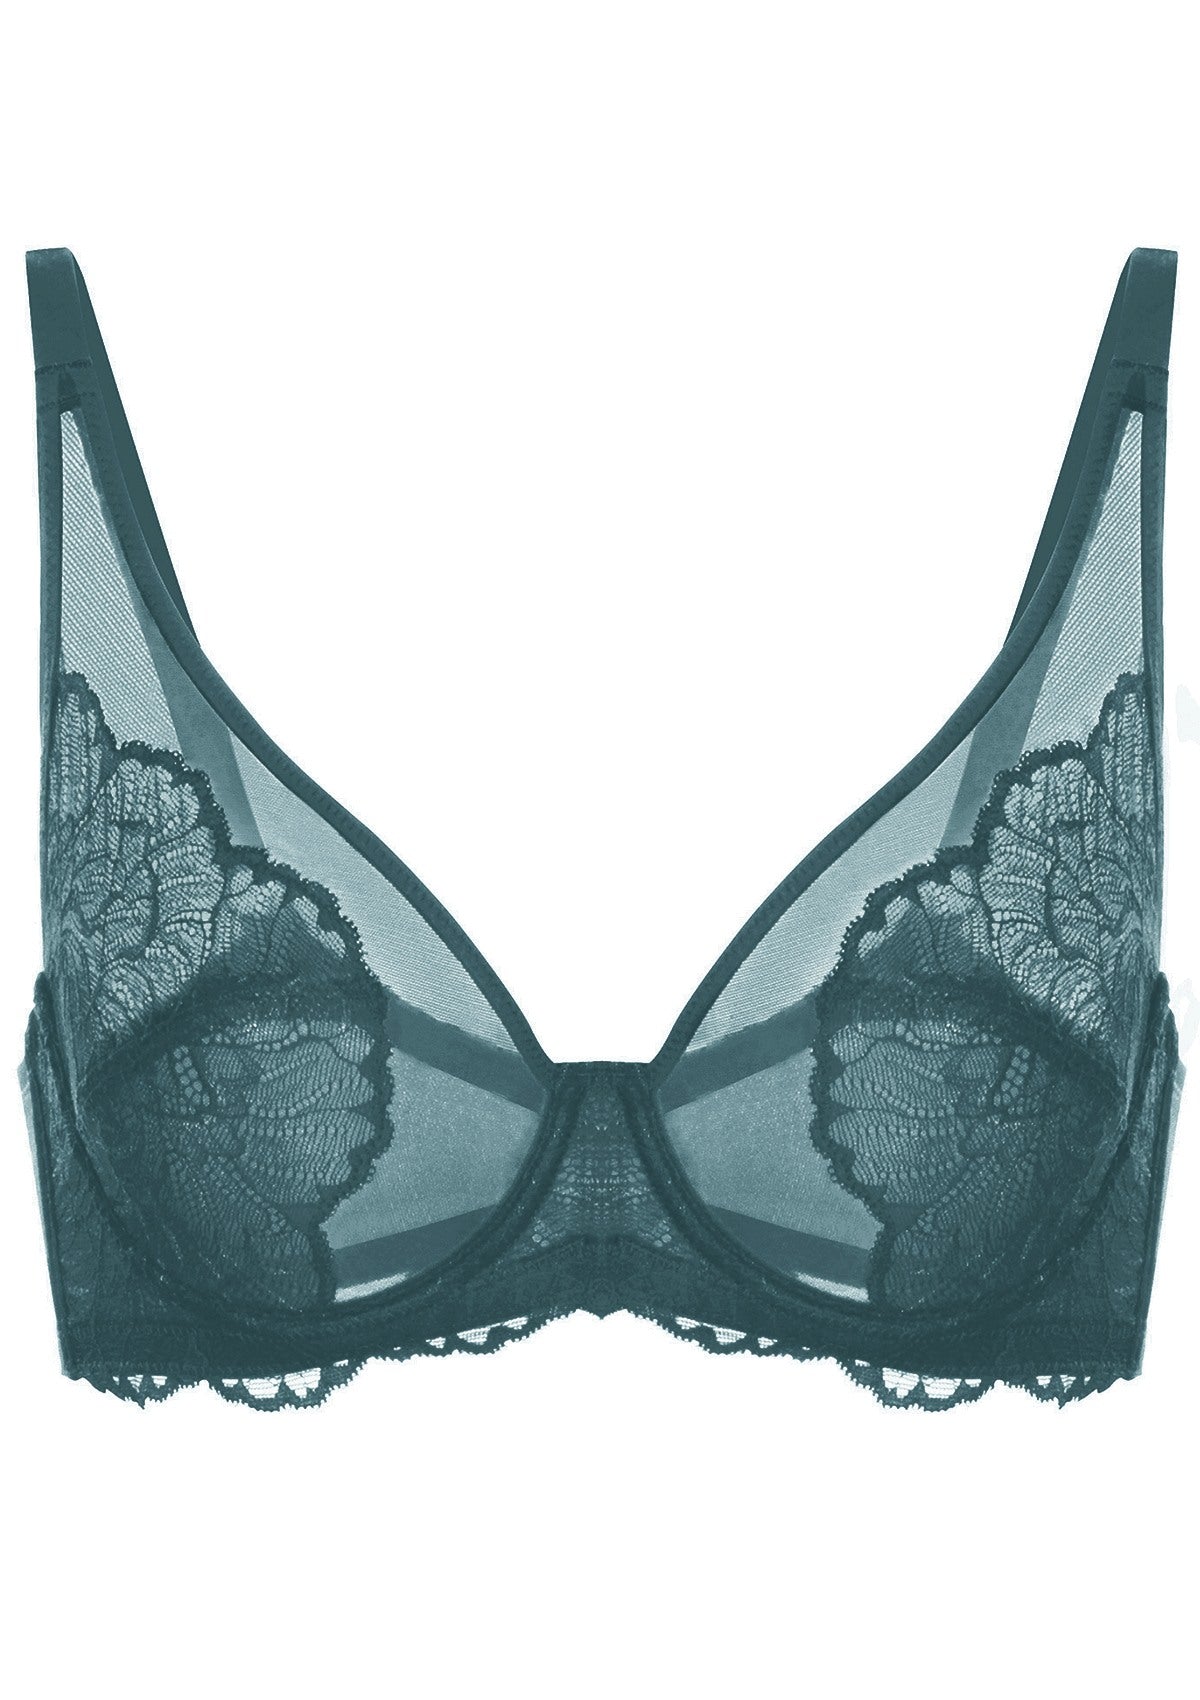 HSIA Blossom Full Figure See-Through Lace Bra For Side And Back Fat - Balsam Blue / 36 / G